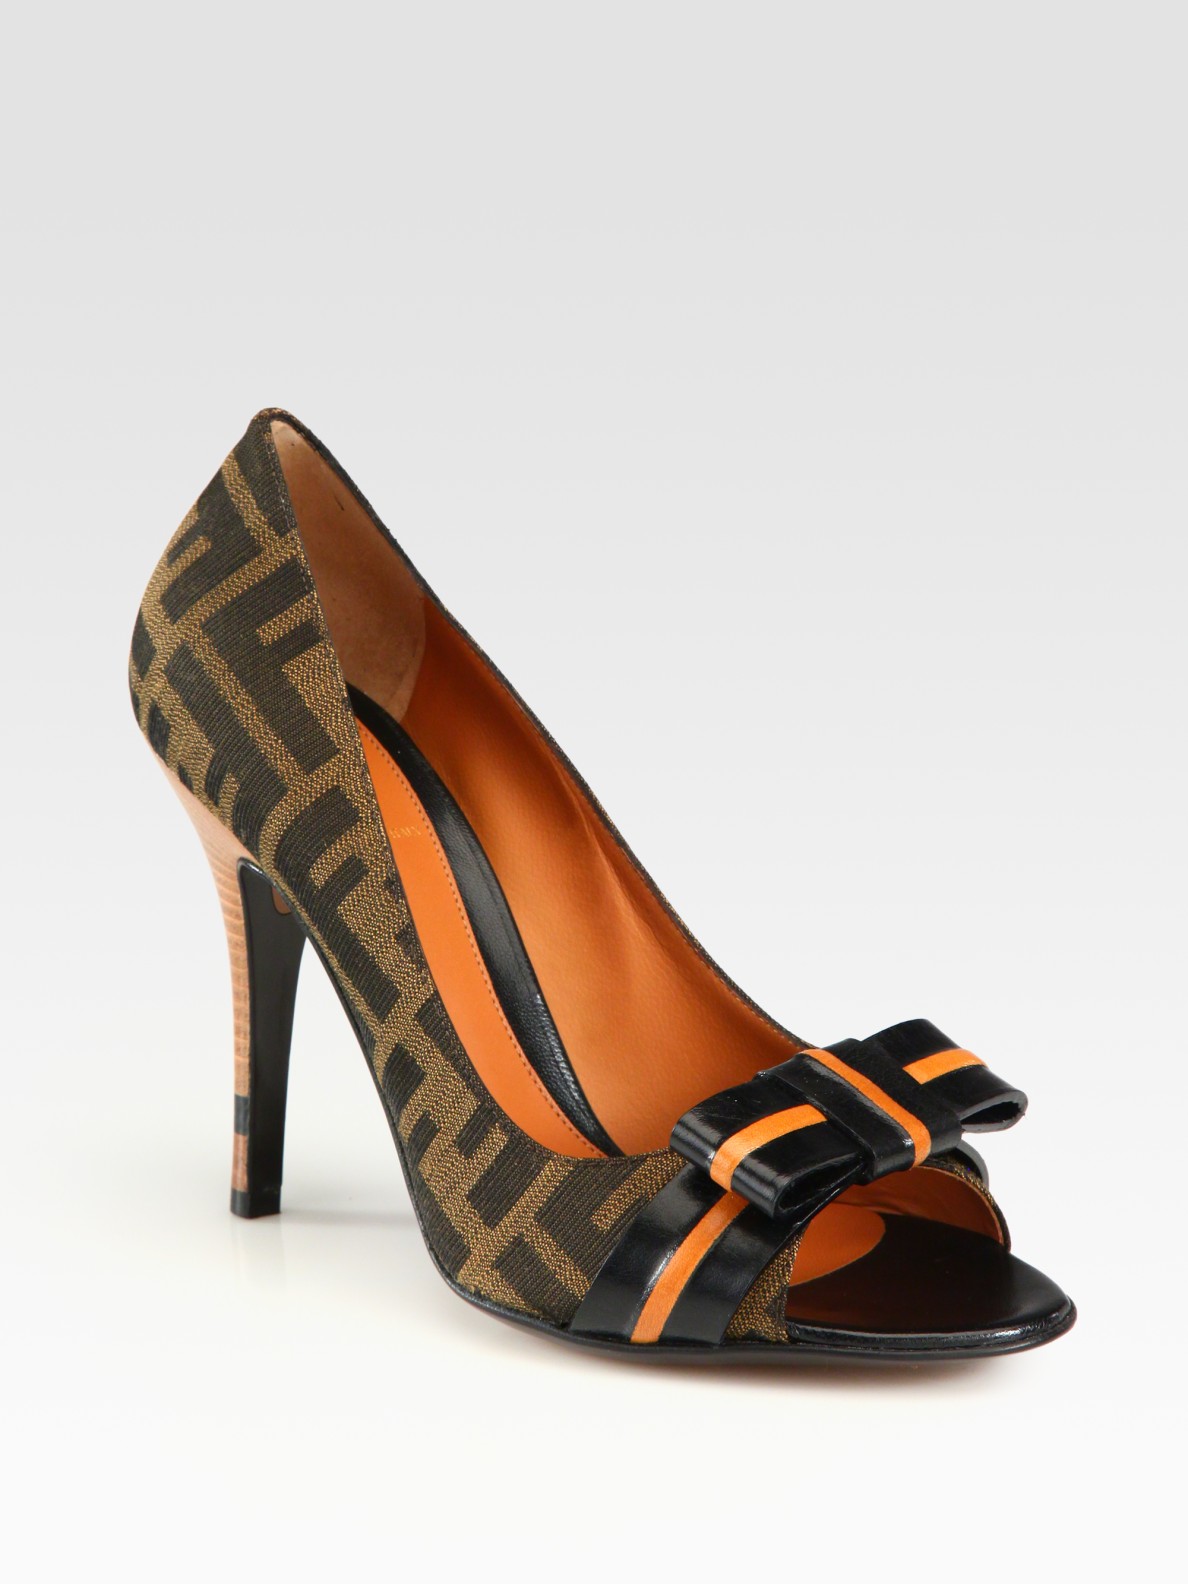 Lyst - Fendi Monogram Canvas and Leather Bow Pumps in Brown